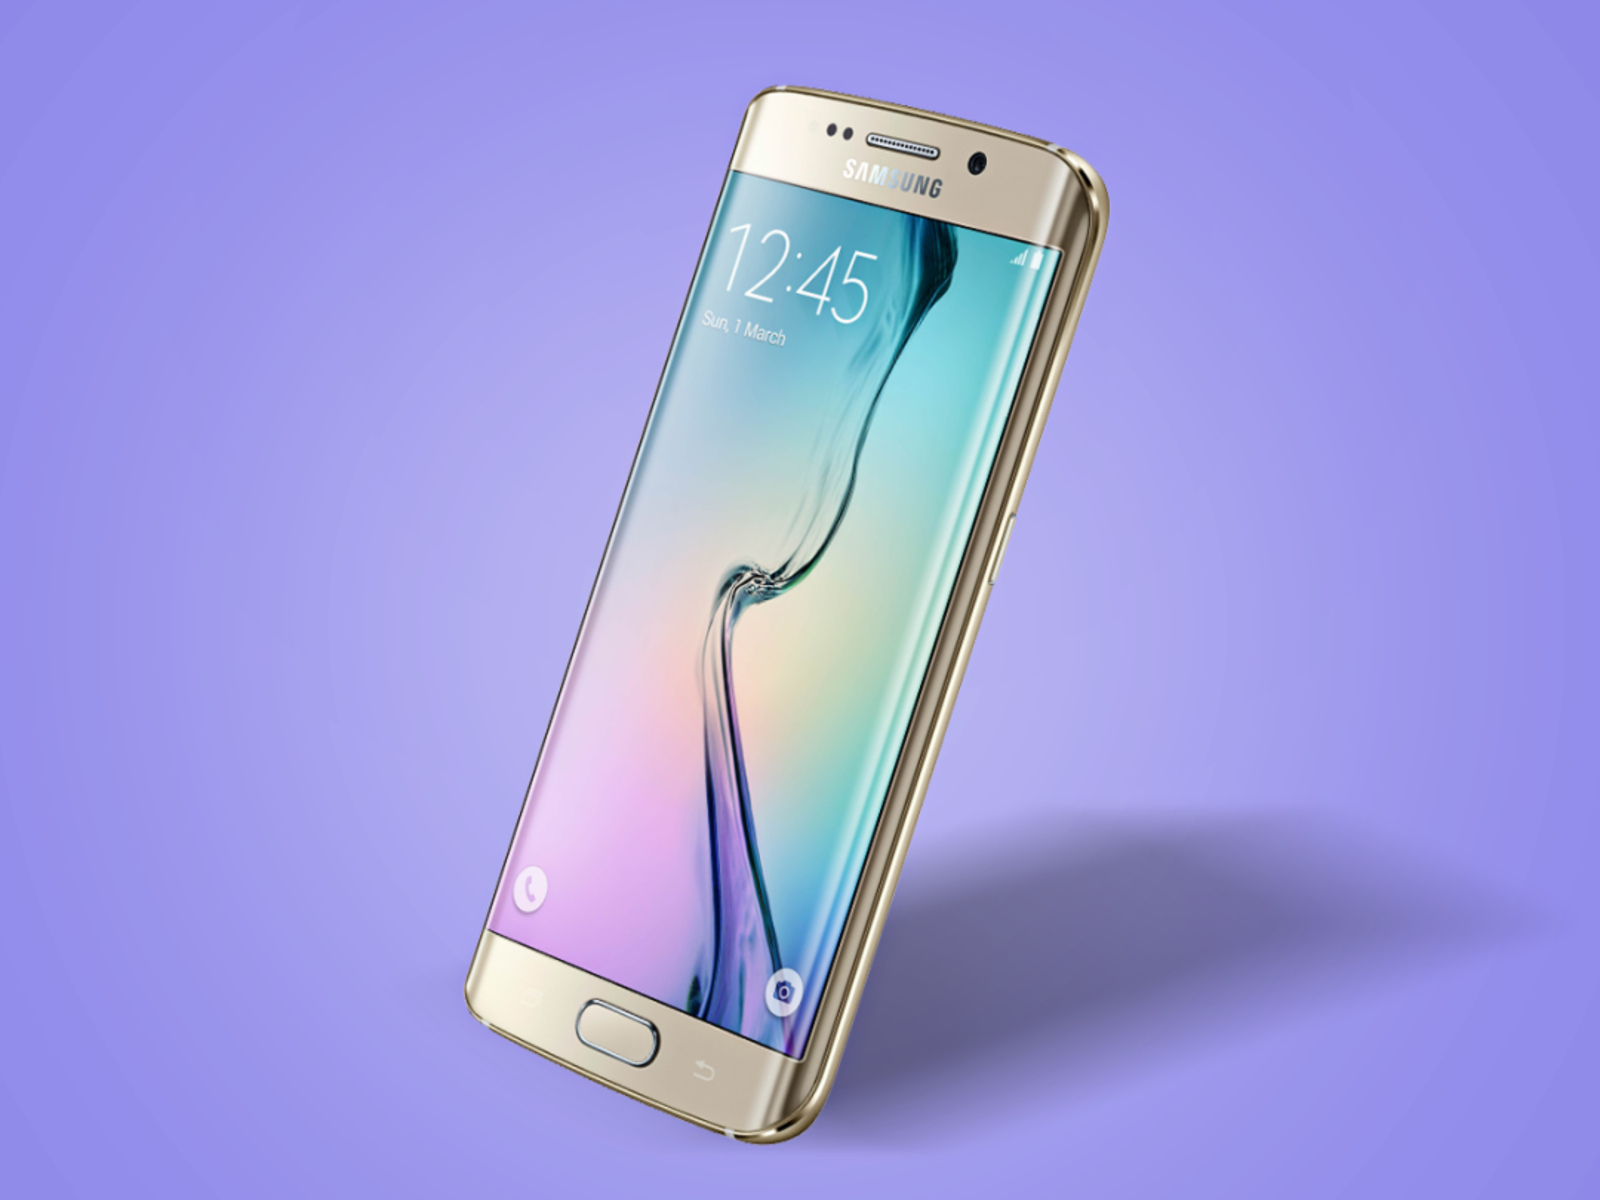 Samsung Galaxy Edge Series: What You Need To Know